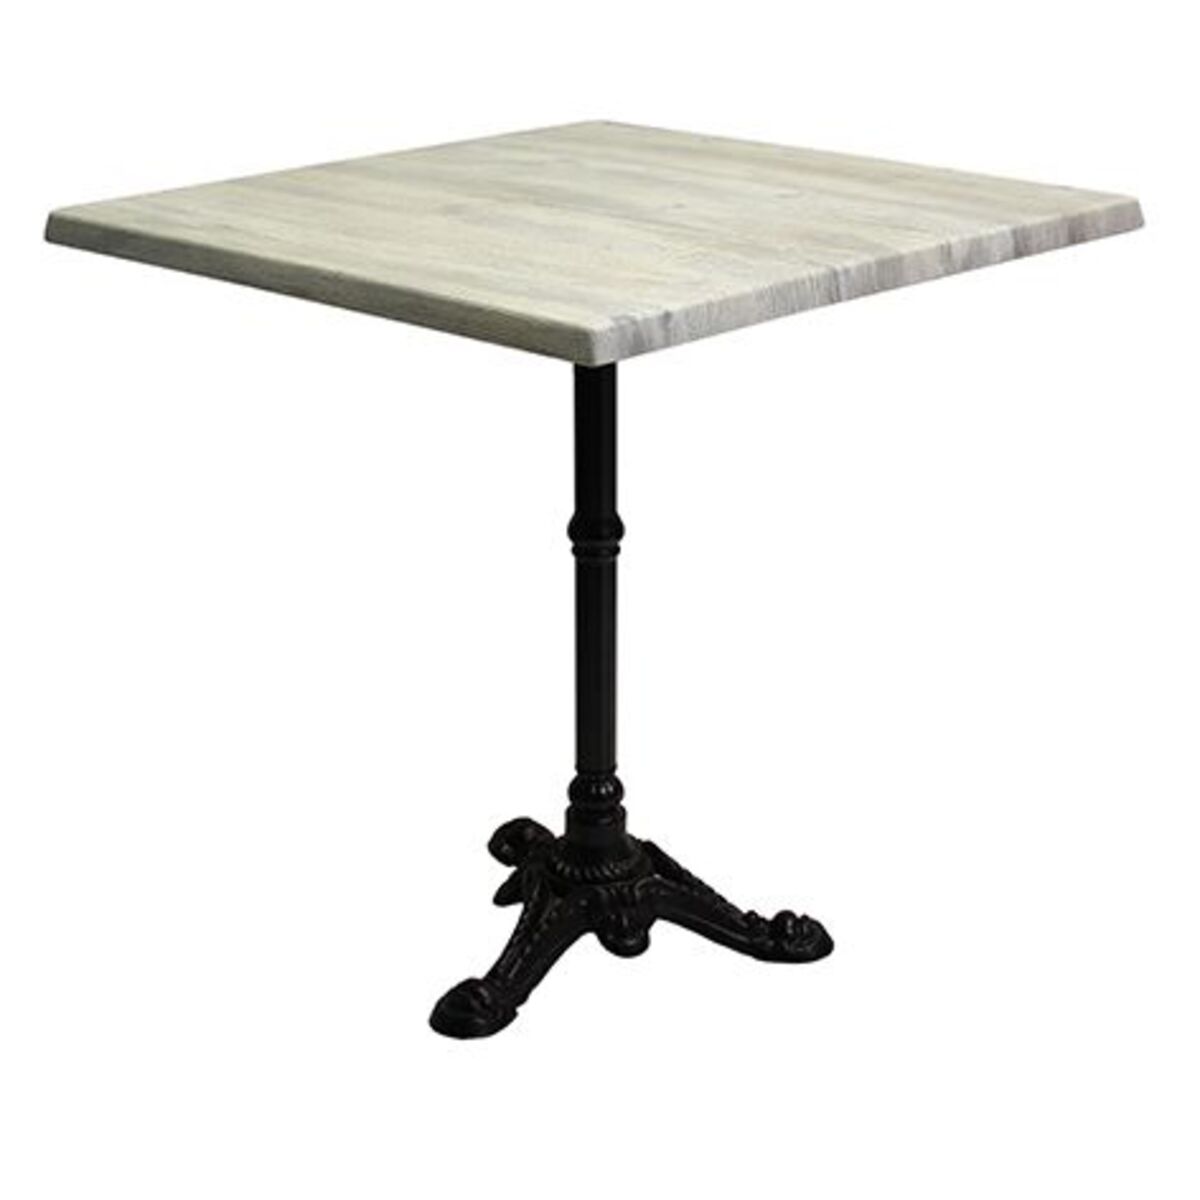 Table int. Pied fonte 3 branches bistrot & plateau werzalit blanc 60x60 cm